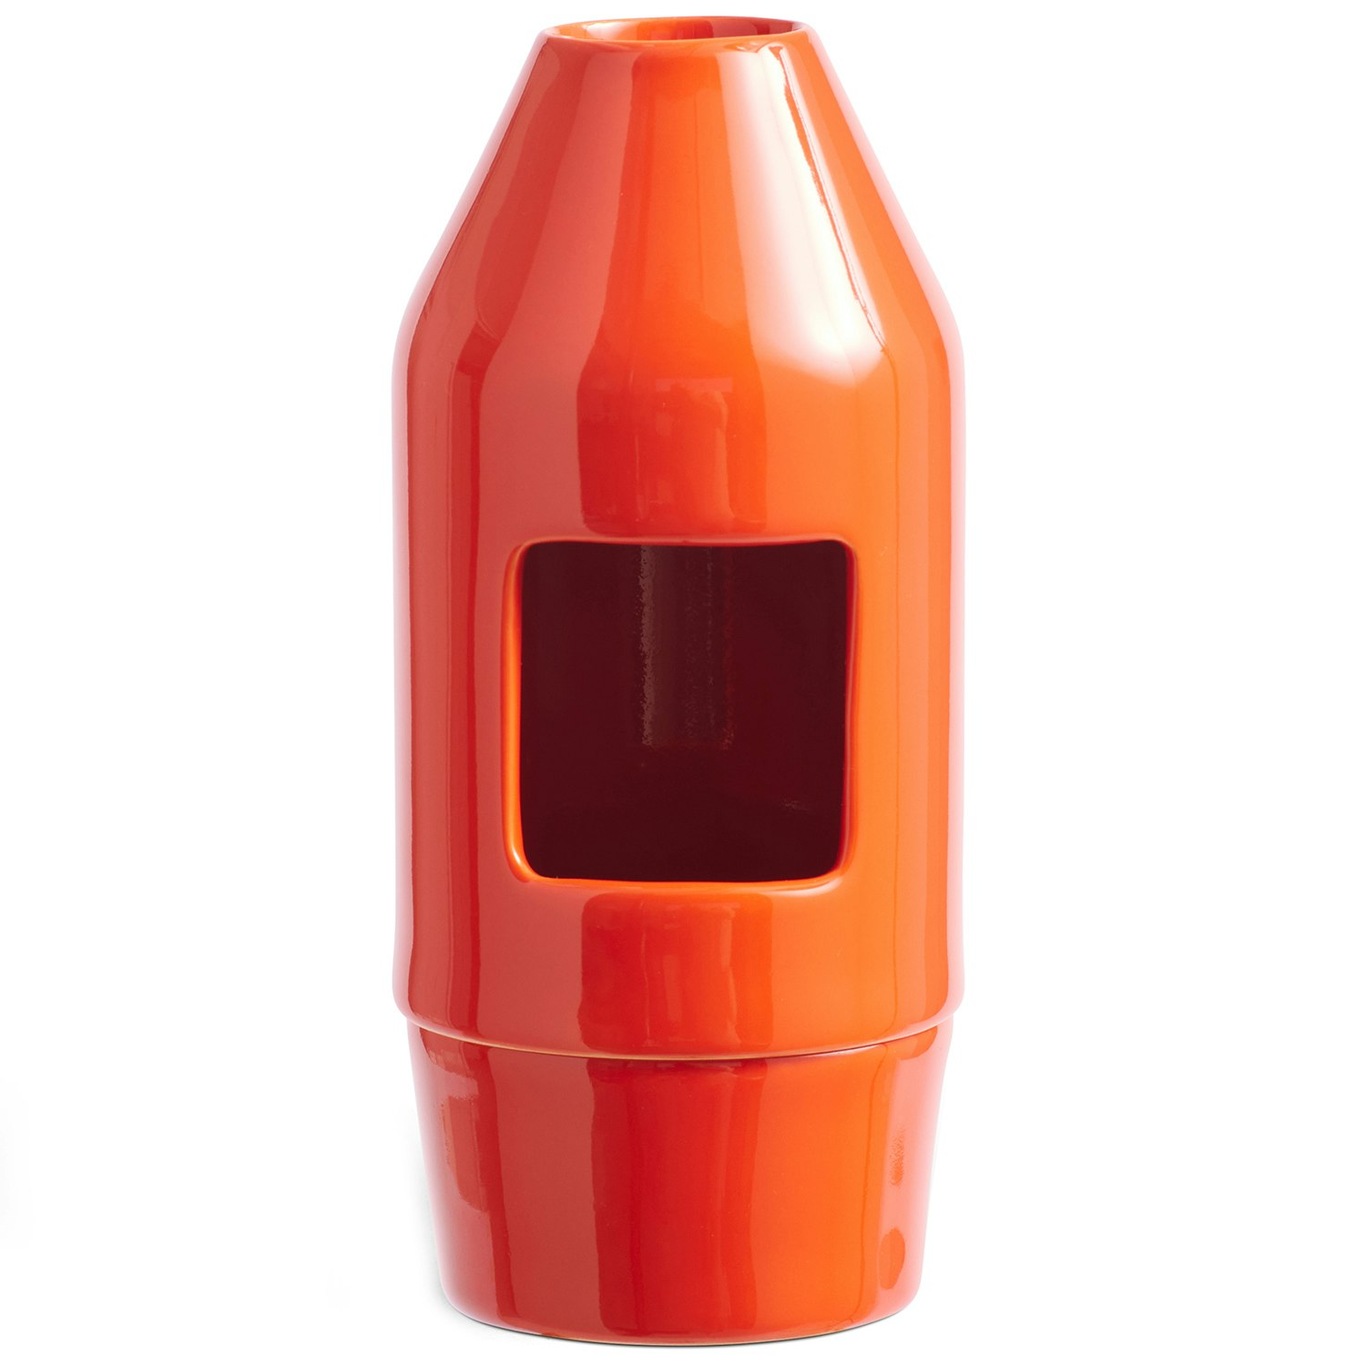 Chim Chim Scent Diffuser, Red